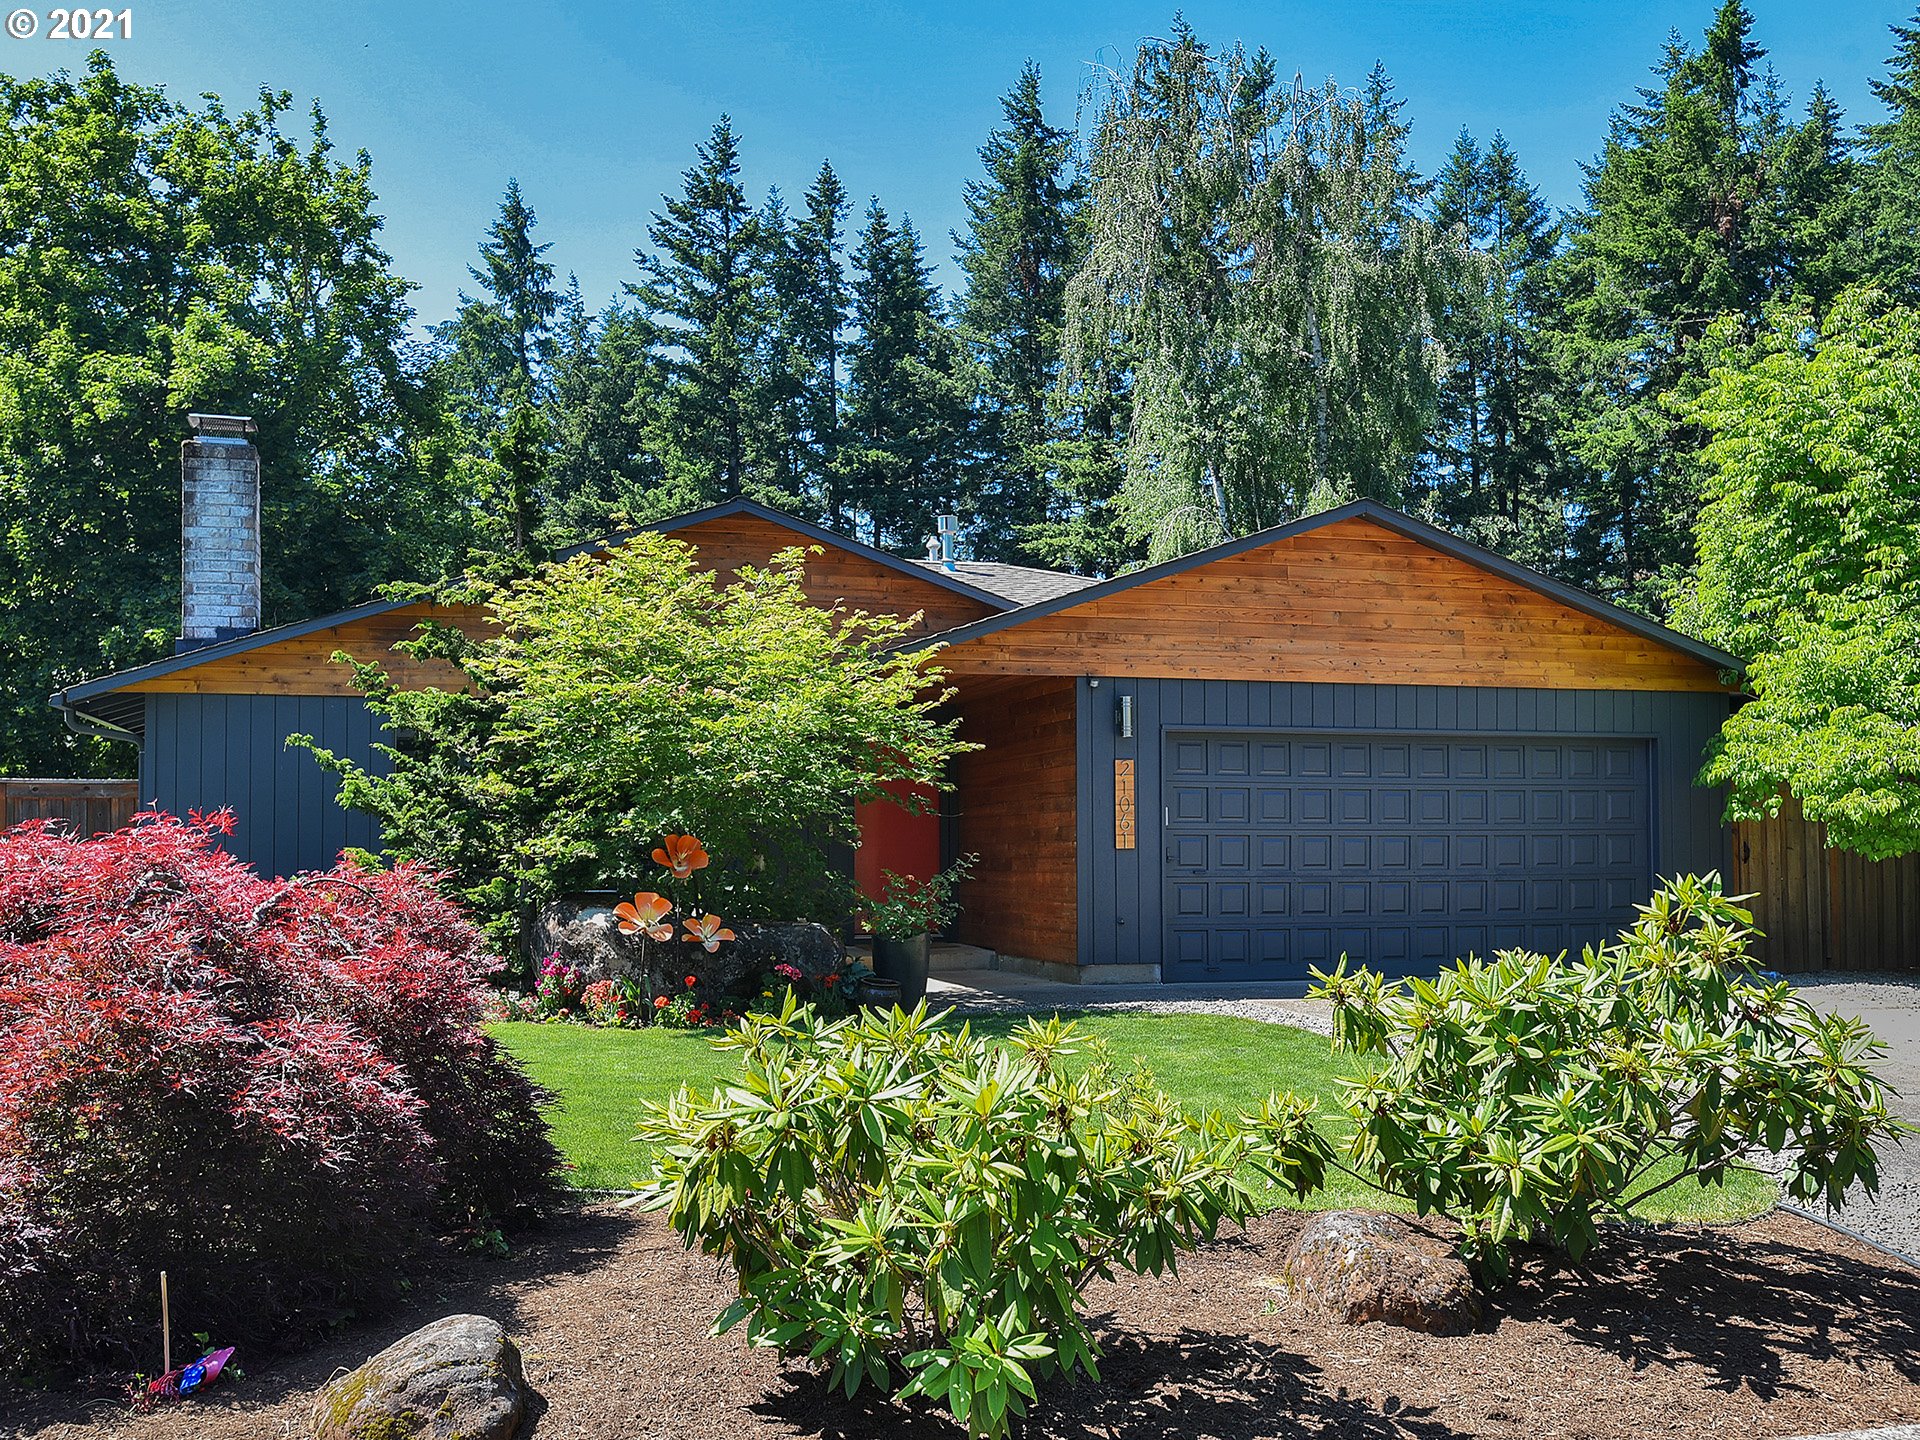 21061 S MOSSY ROCK CT (1 of 31)